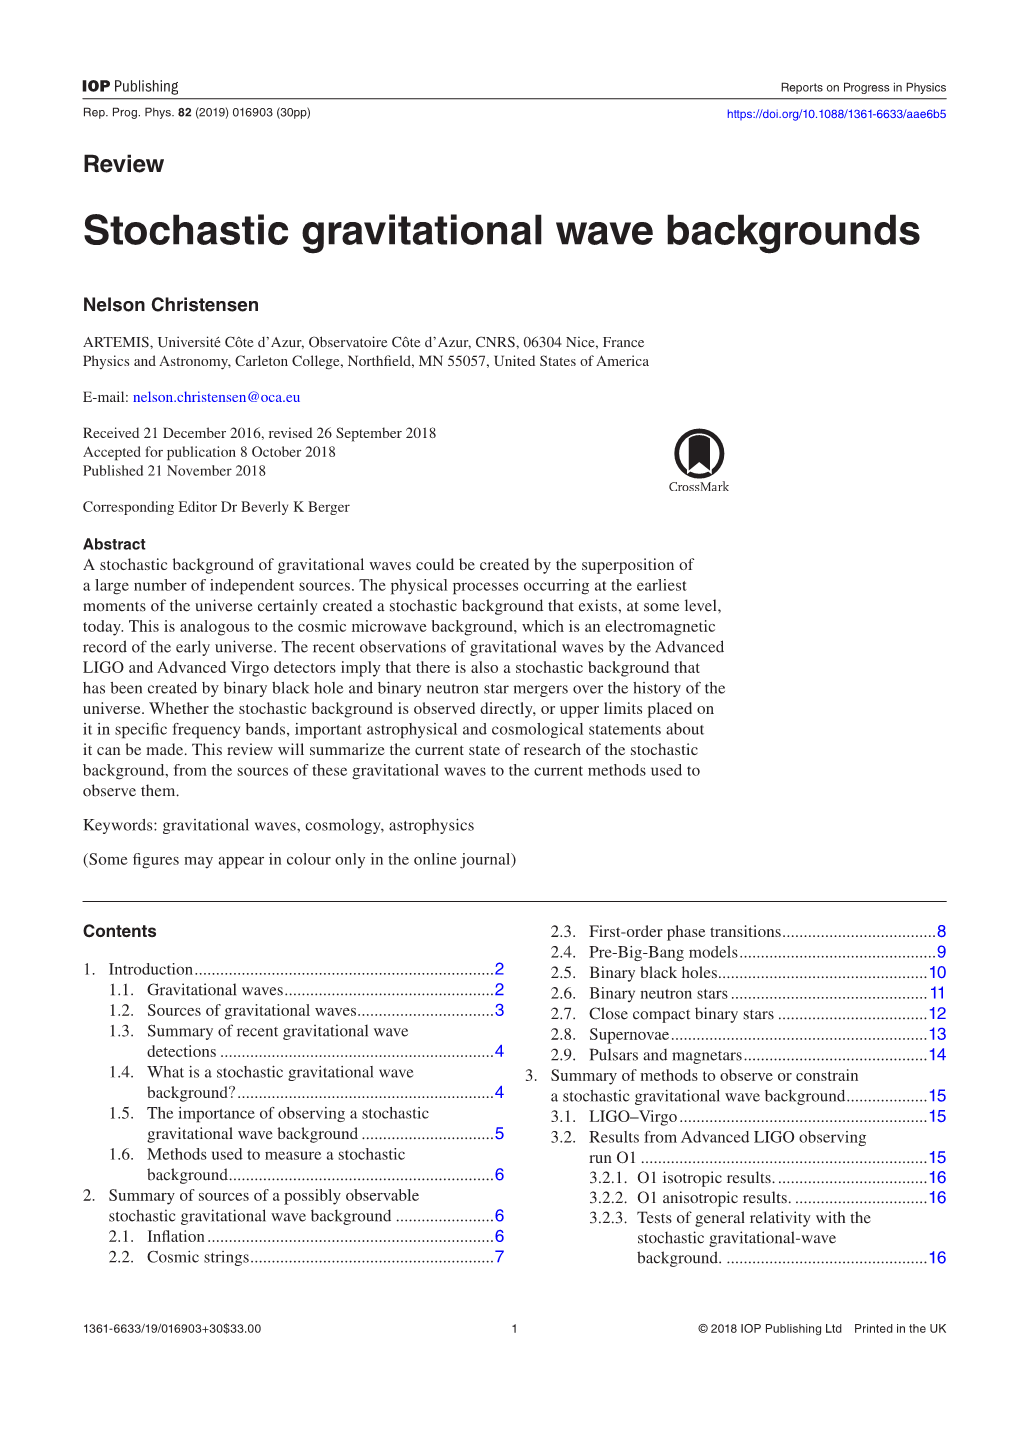 Stochastic Gravitational Wave Backgrounds